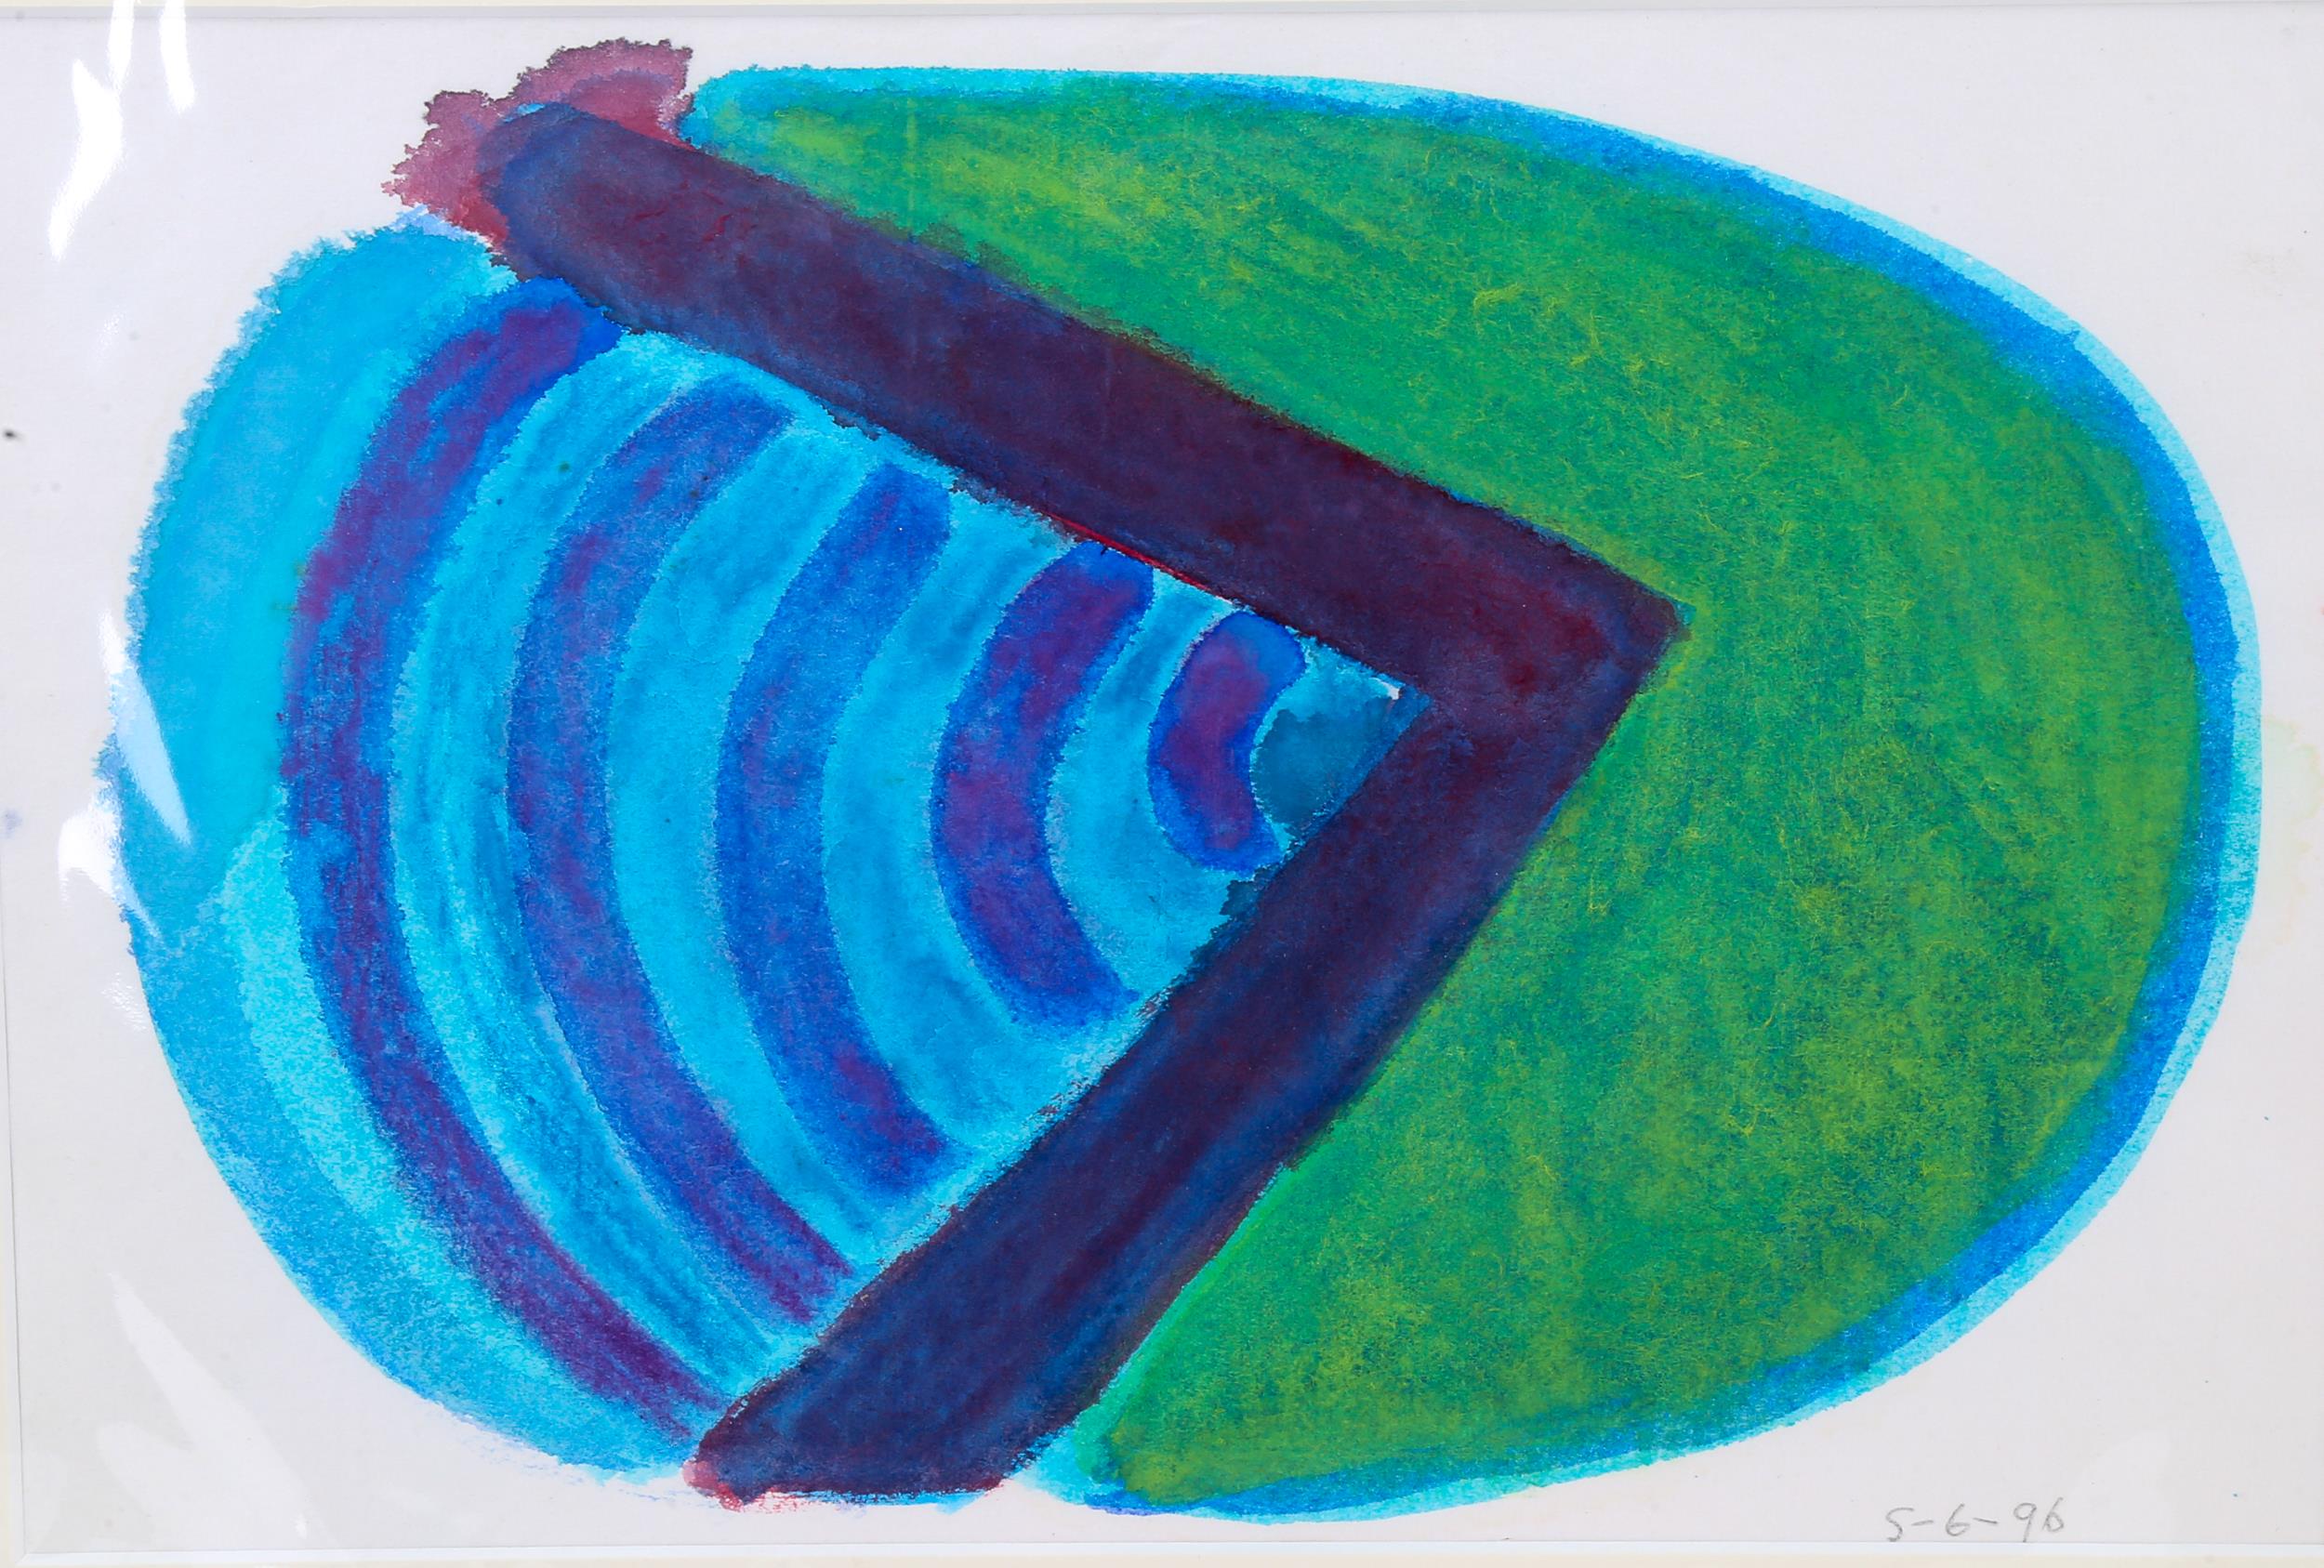 John Edwards (1938 - 2009), 3 watercolours, abstracts, dated 1996, unsigned, 26cm x 38cm, mounted